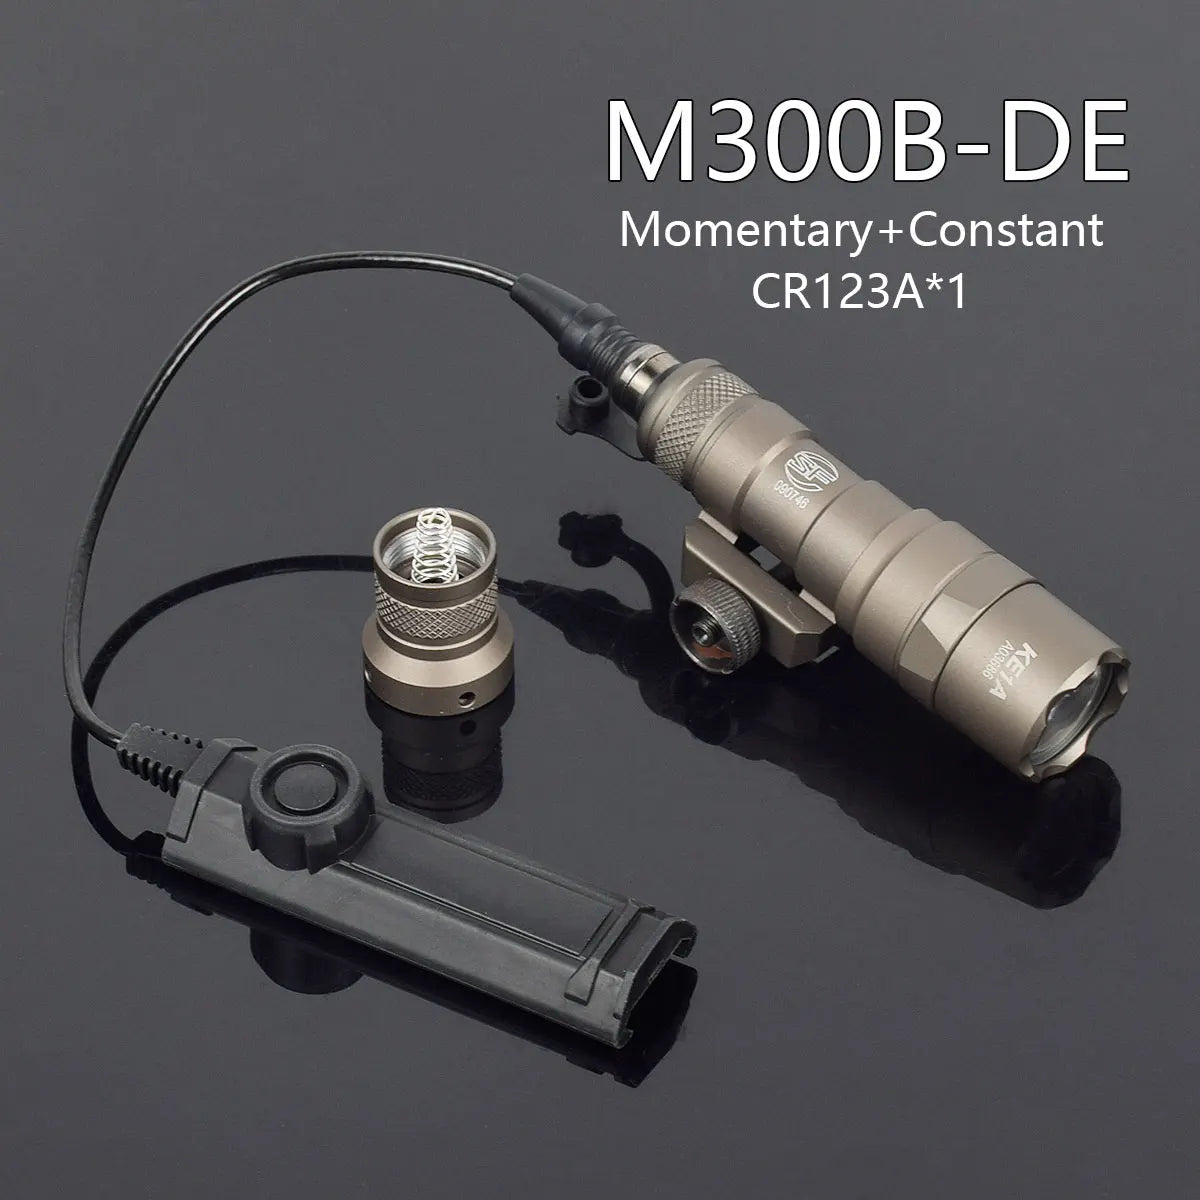 Tactical flashlight with pressure switch and battery on dark background.